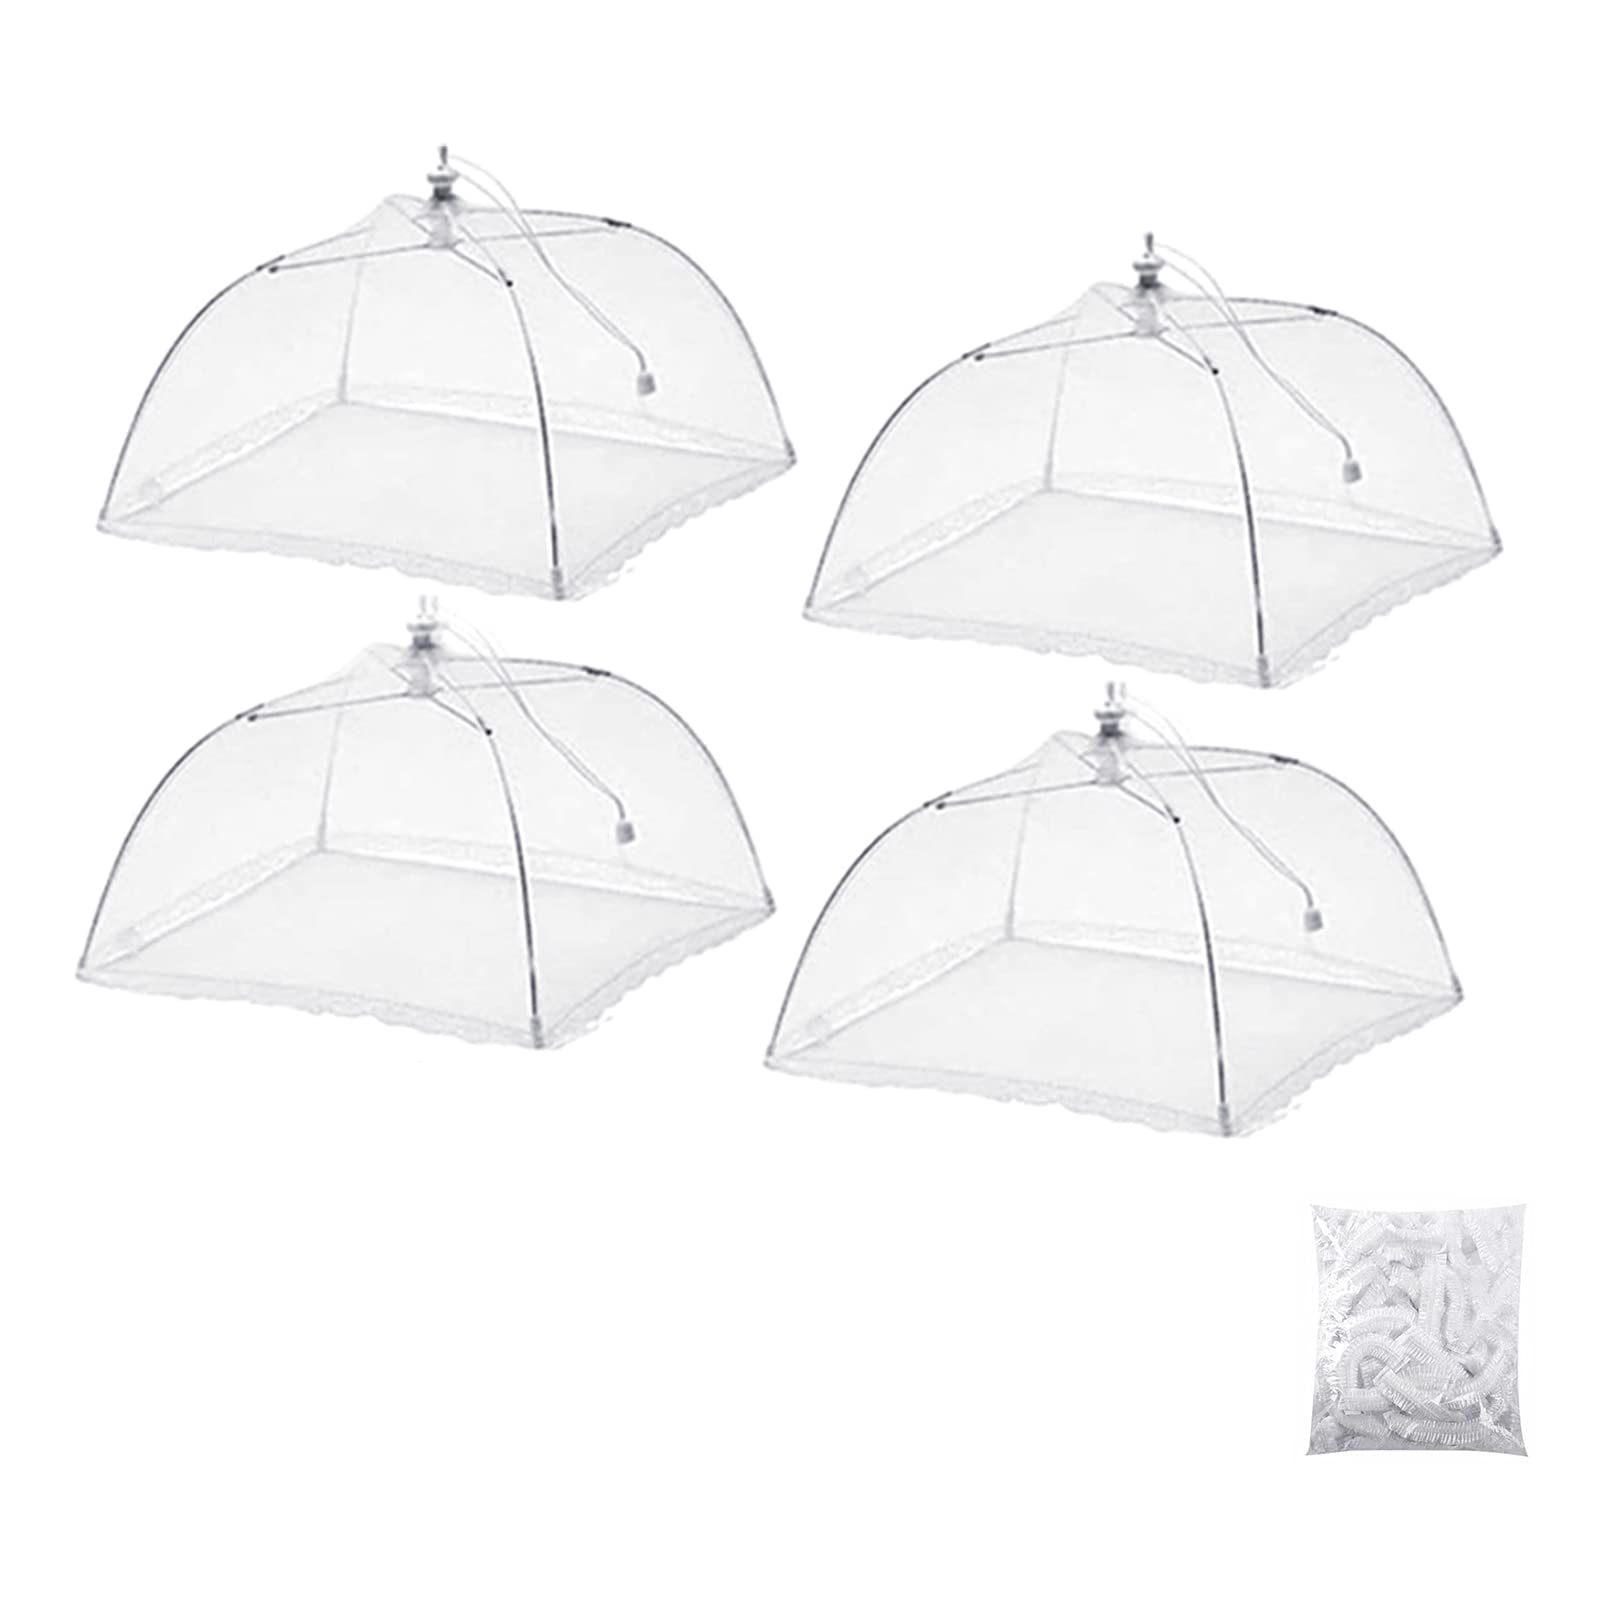 13 X MESH FOOD COVER TENT,ASKYW WHITE NYLON COVERS, 4 PACK 17 INCHES POP-UP UMBRELLA SCREEN FOOD COVERS NET FOR OUTDOORS, PARTIES PICNICS, BBQS, REUSABLE & COLLAPSIBLE - TOTAL RRP £119: LOCATION - RA